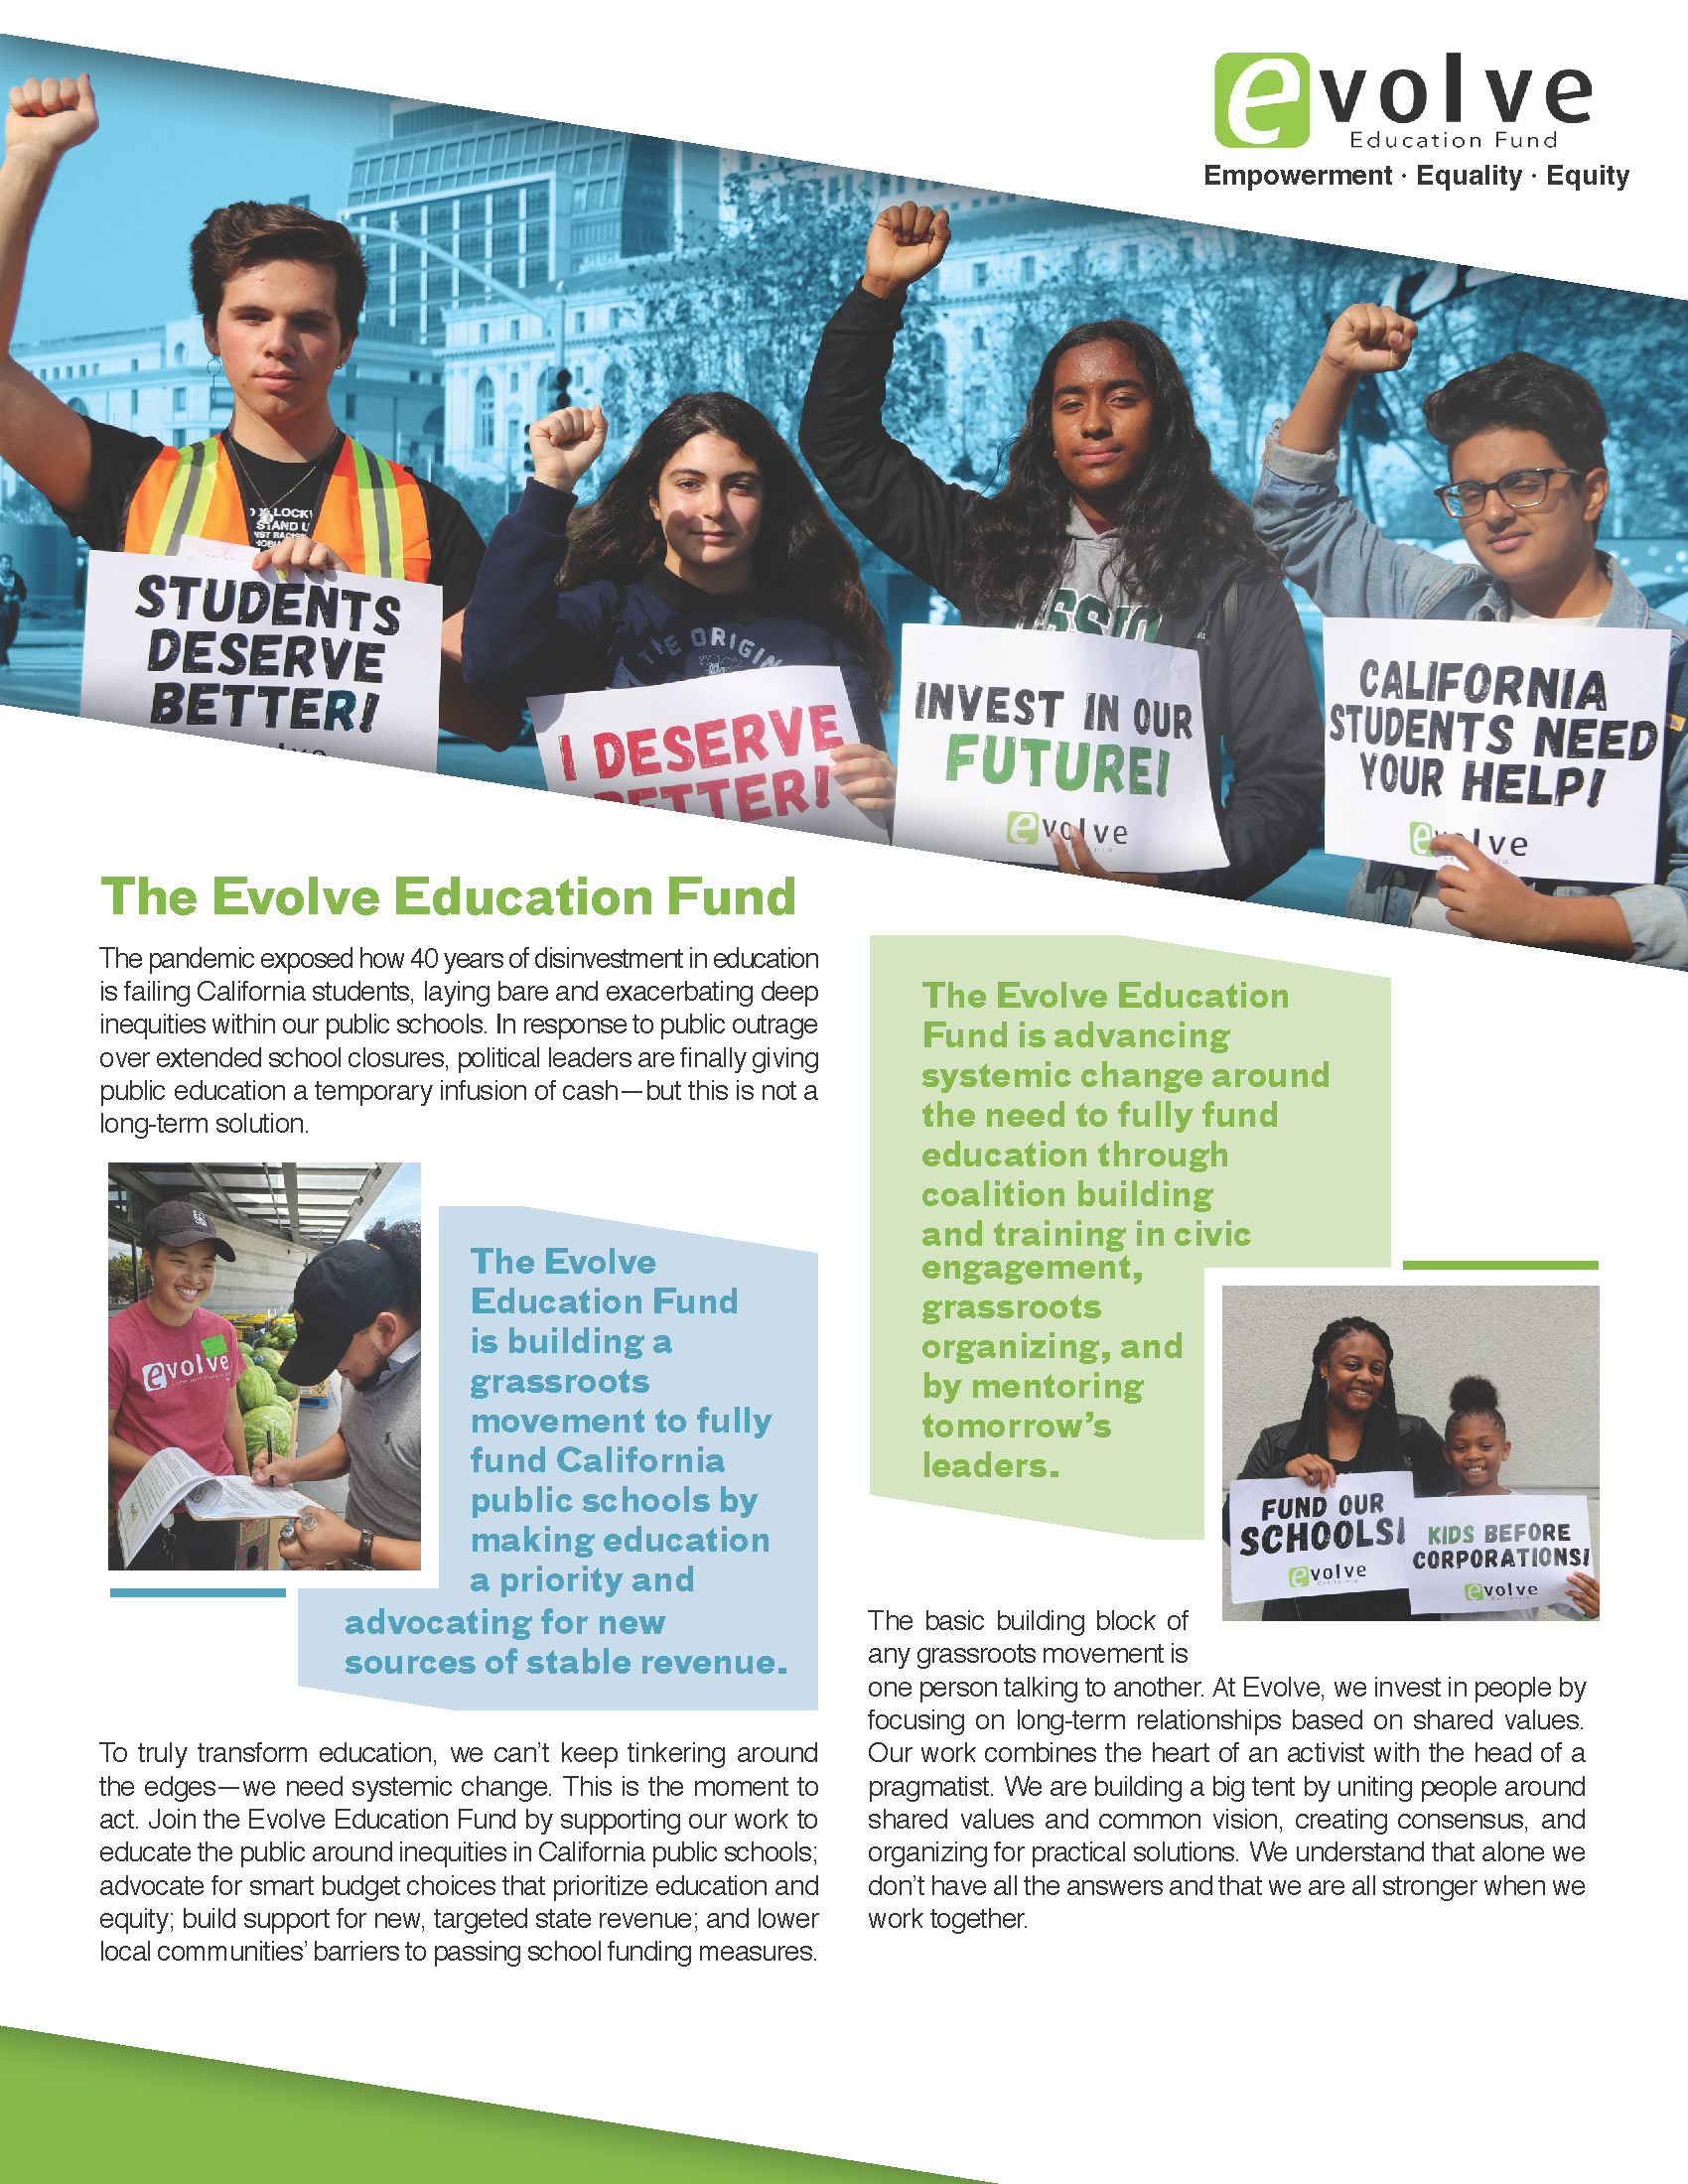 Evolve CA-one-pager 8.23.21_Page_1.png